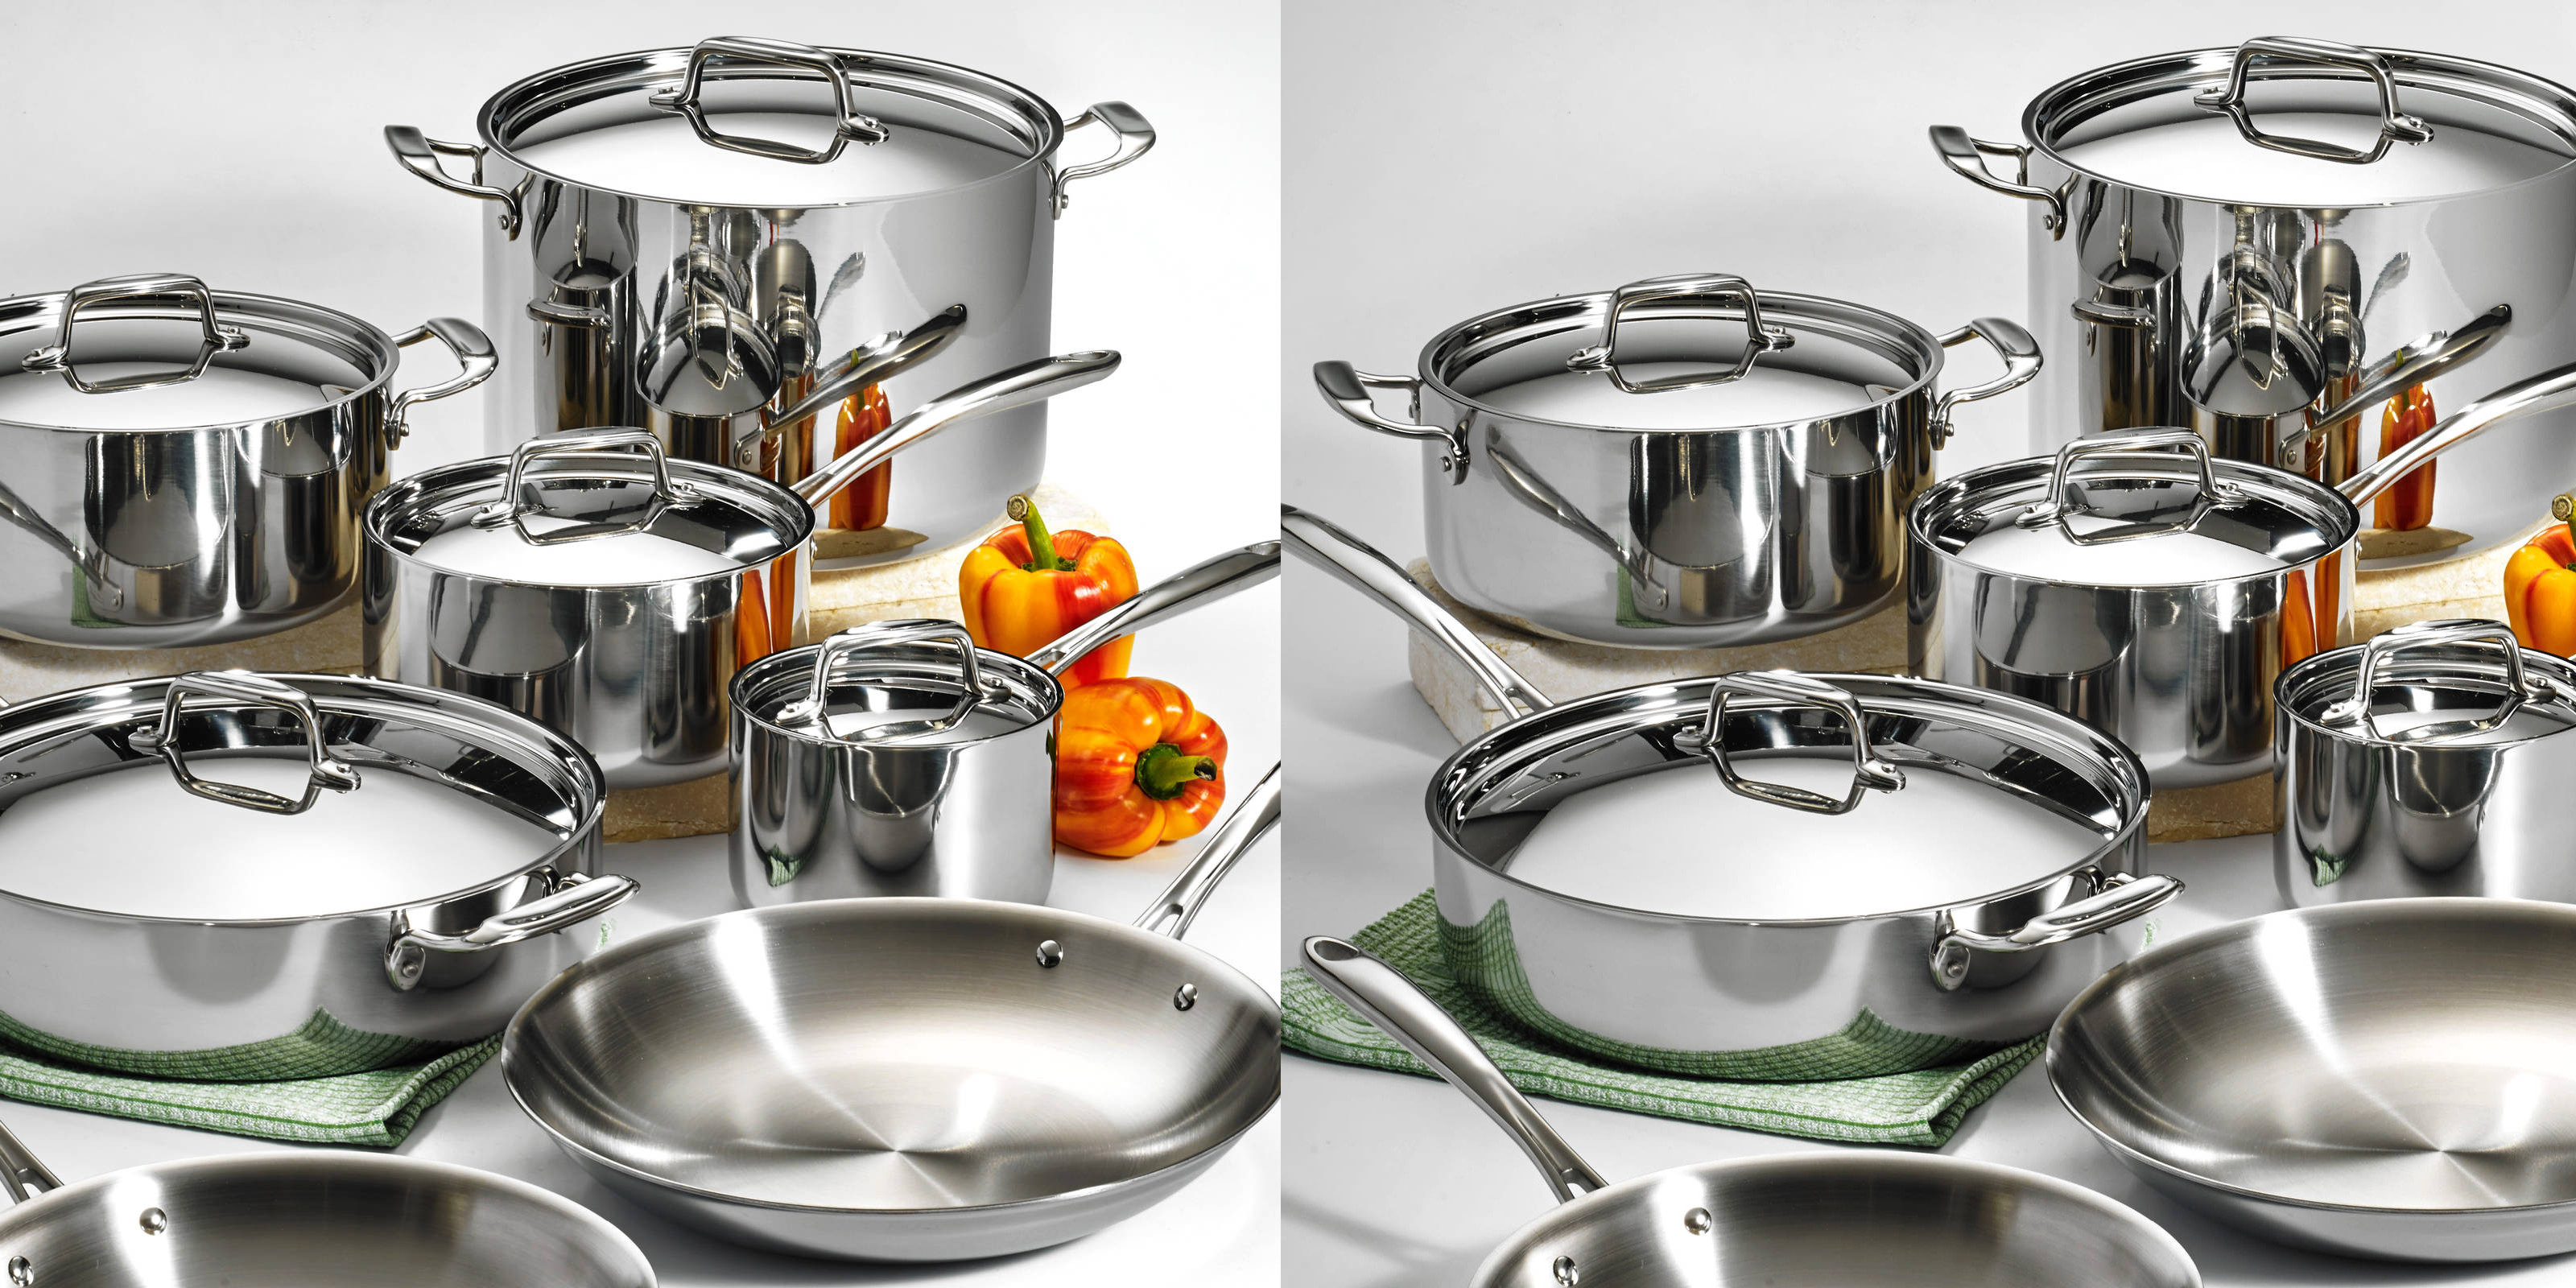 https://9to5toys.com/wp-content/uploads/sites/5/2019/02/Tramontina-12-Piece-Stainless-Steel-Tri-Ply-Clad-Cookware-Set.jpg